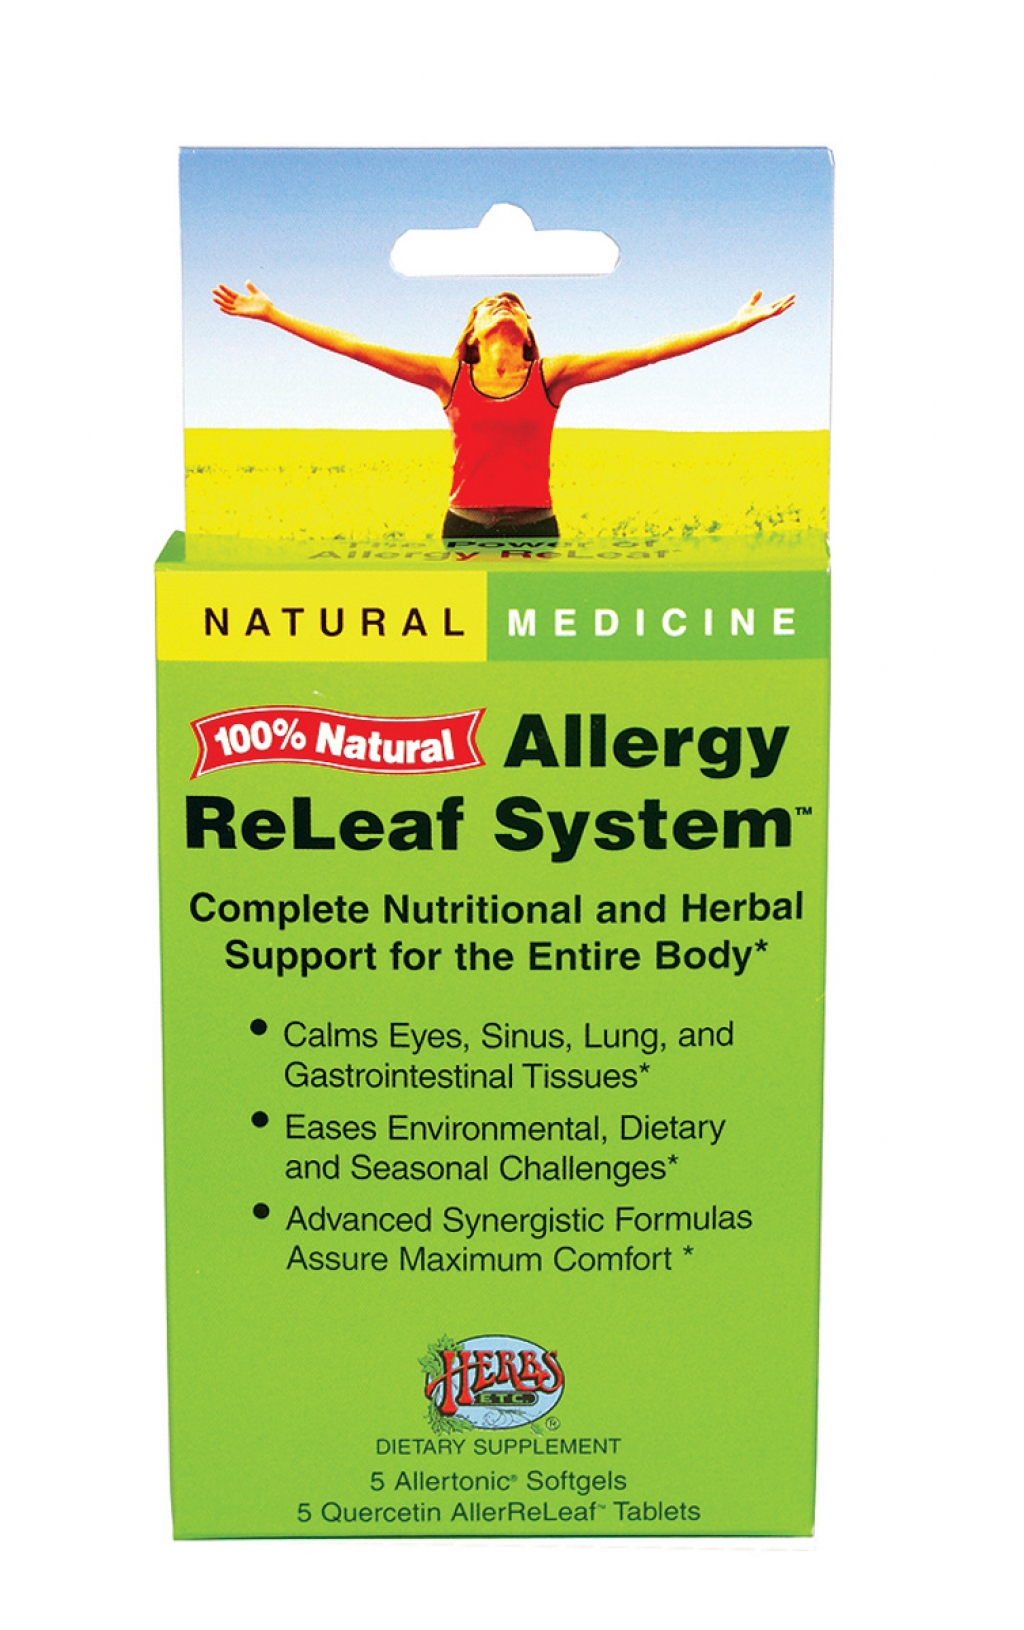 Allergy ReLeaf System from Herbs, Etc.